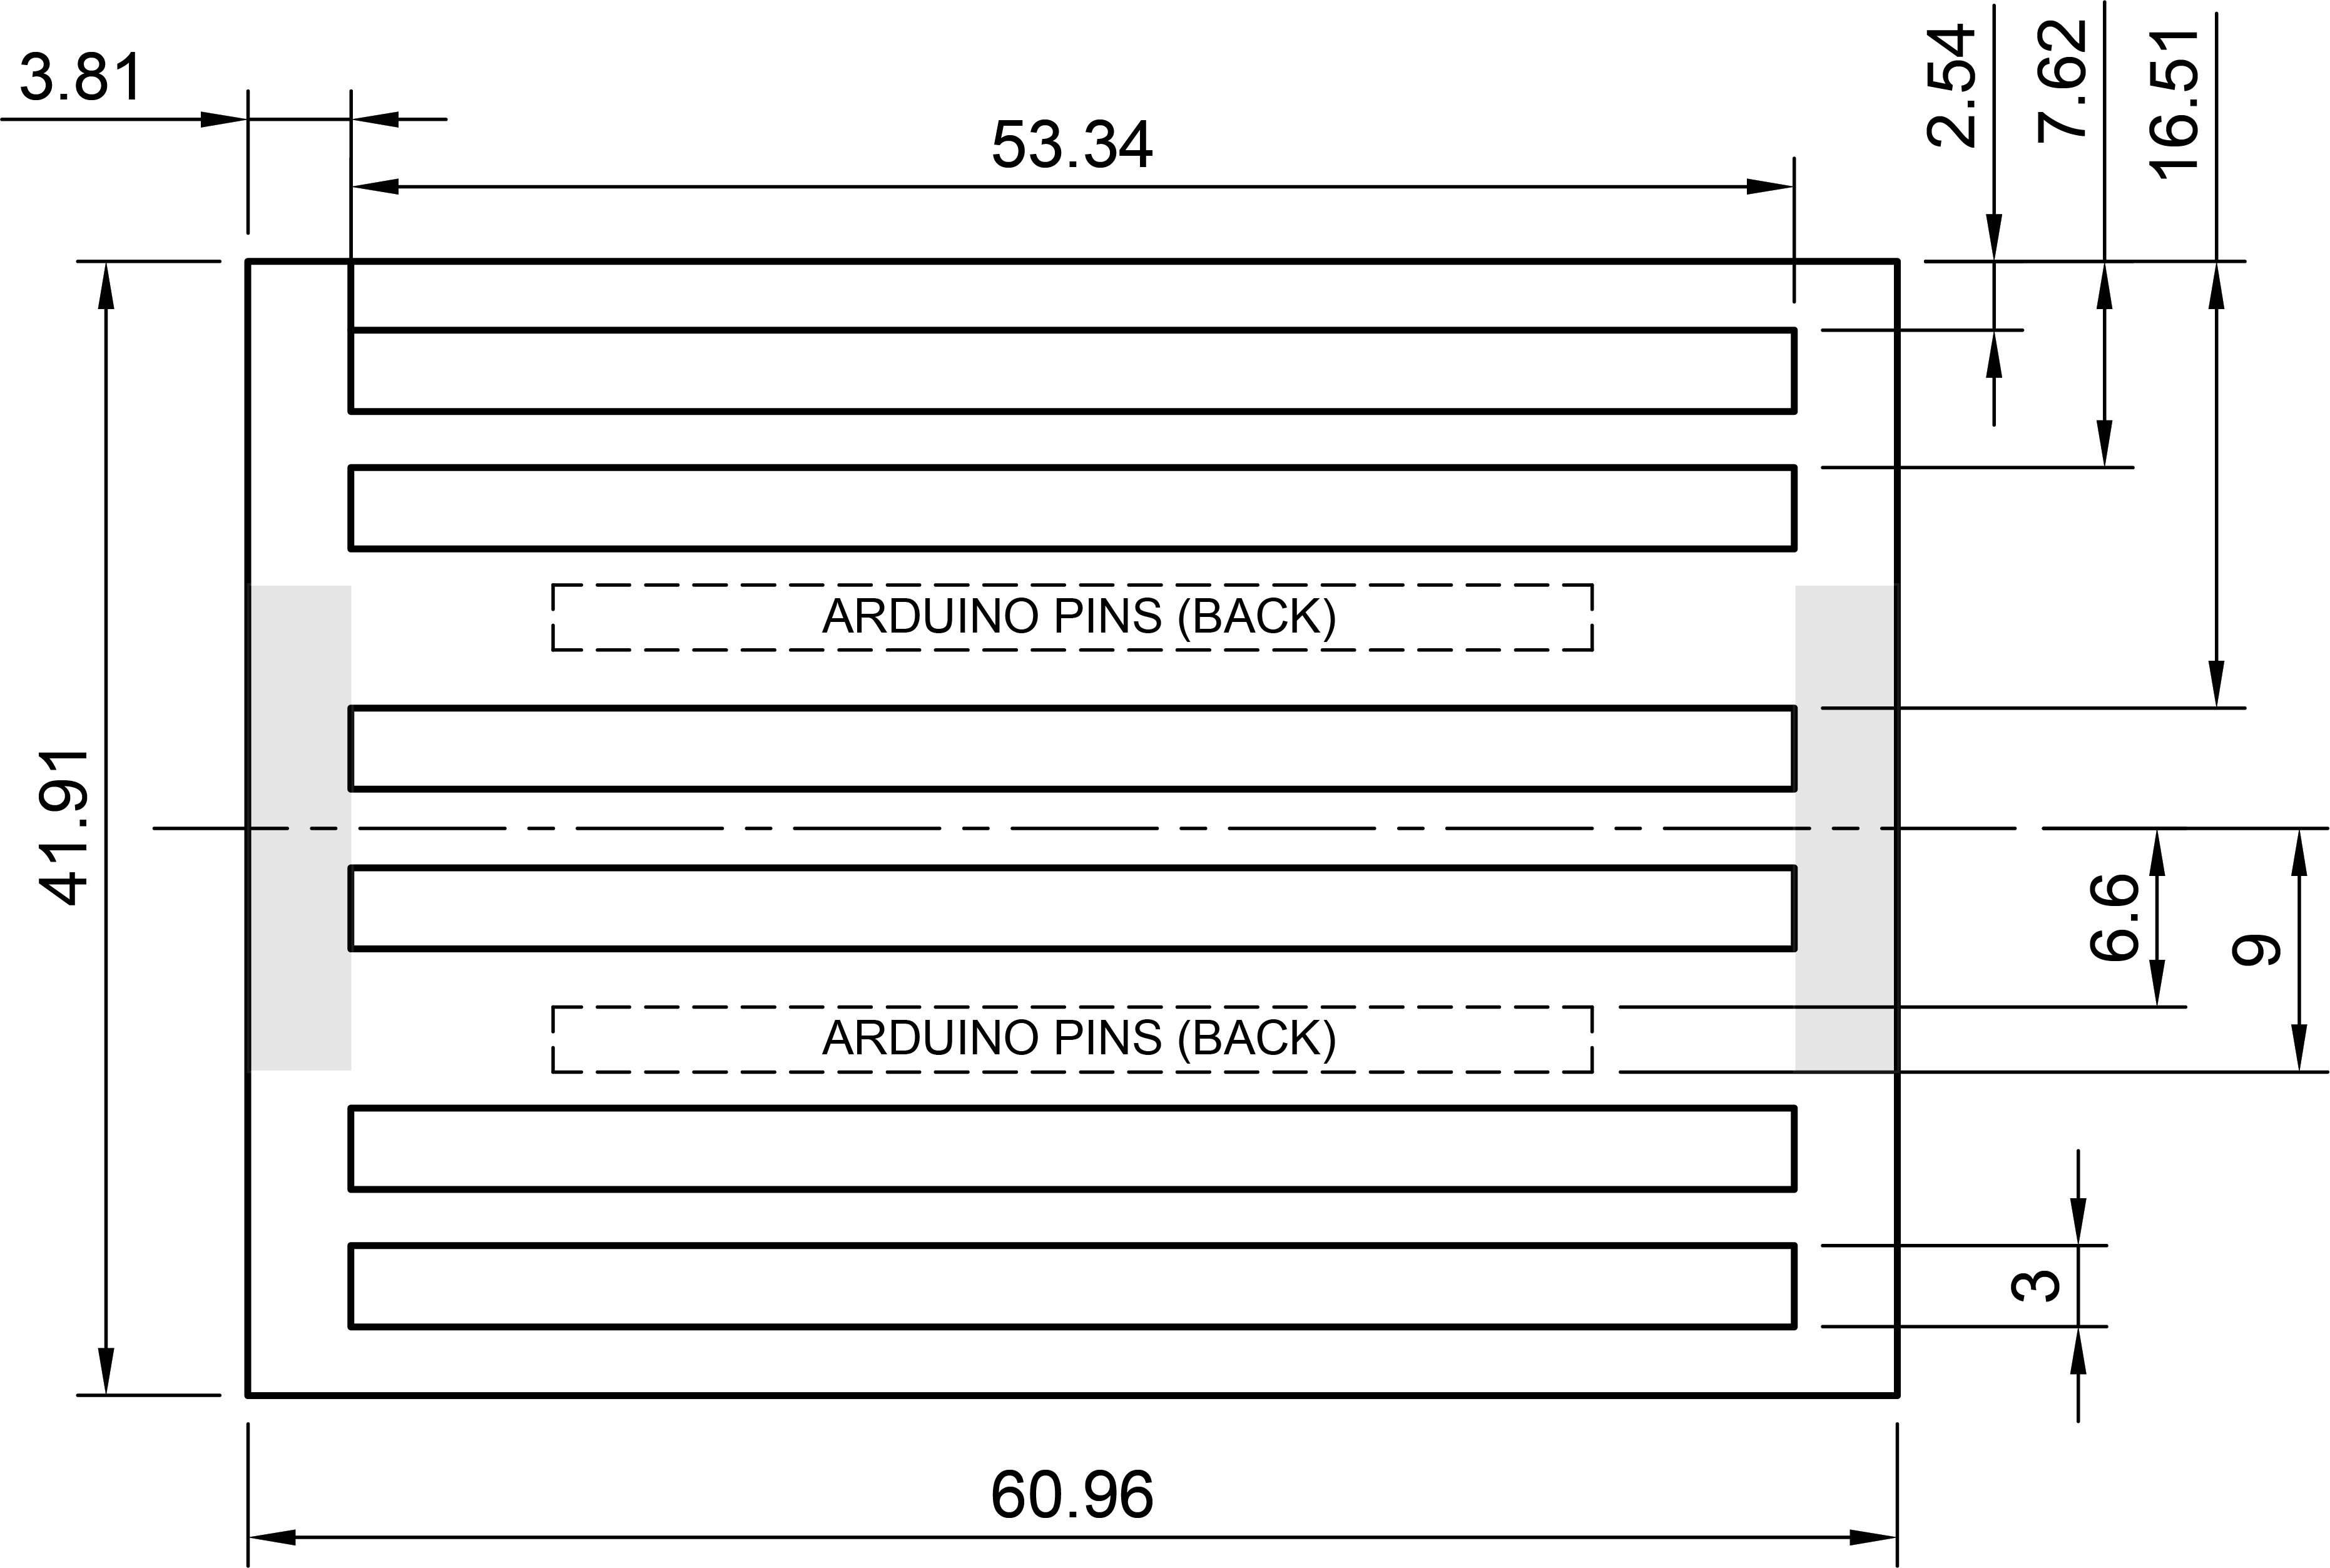 PCB dimensions, showing the keep-clear region in shaded grey, and the acrylic sheet positions.